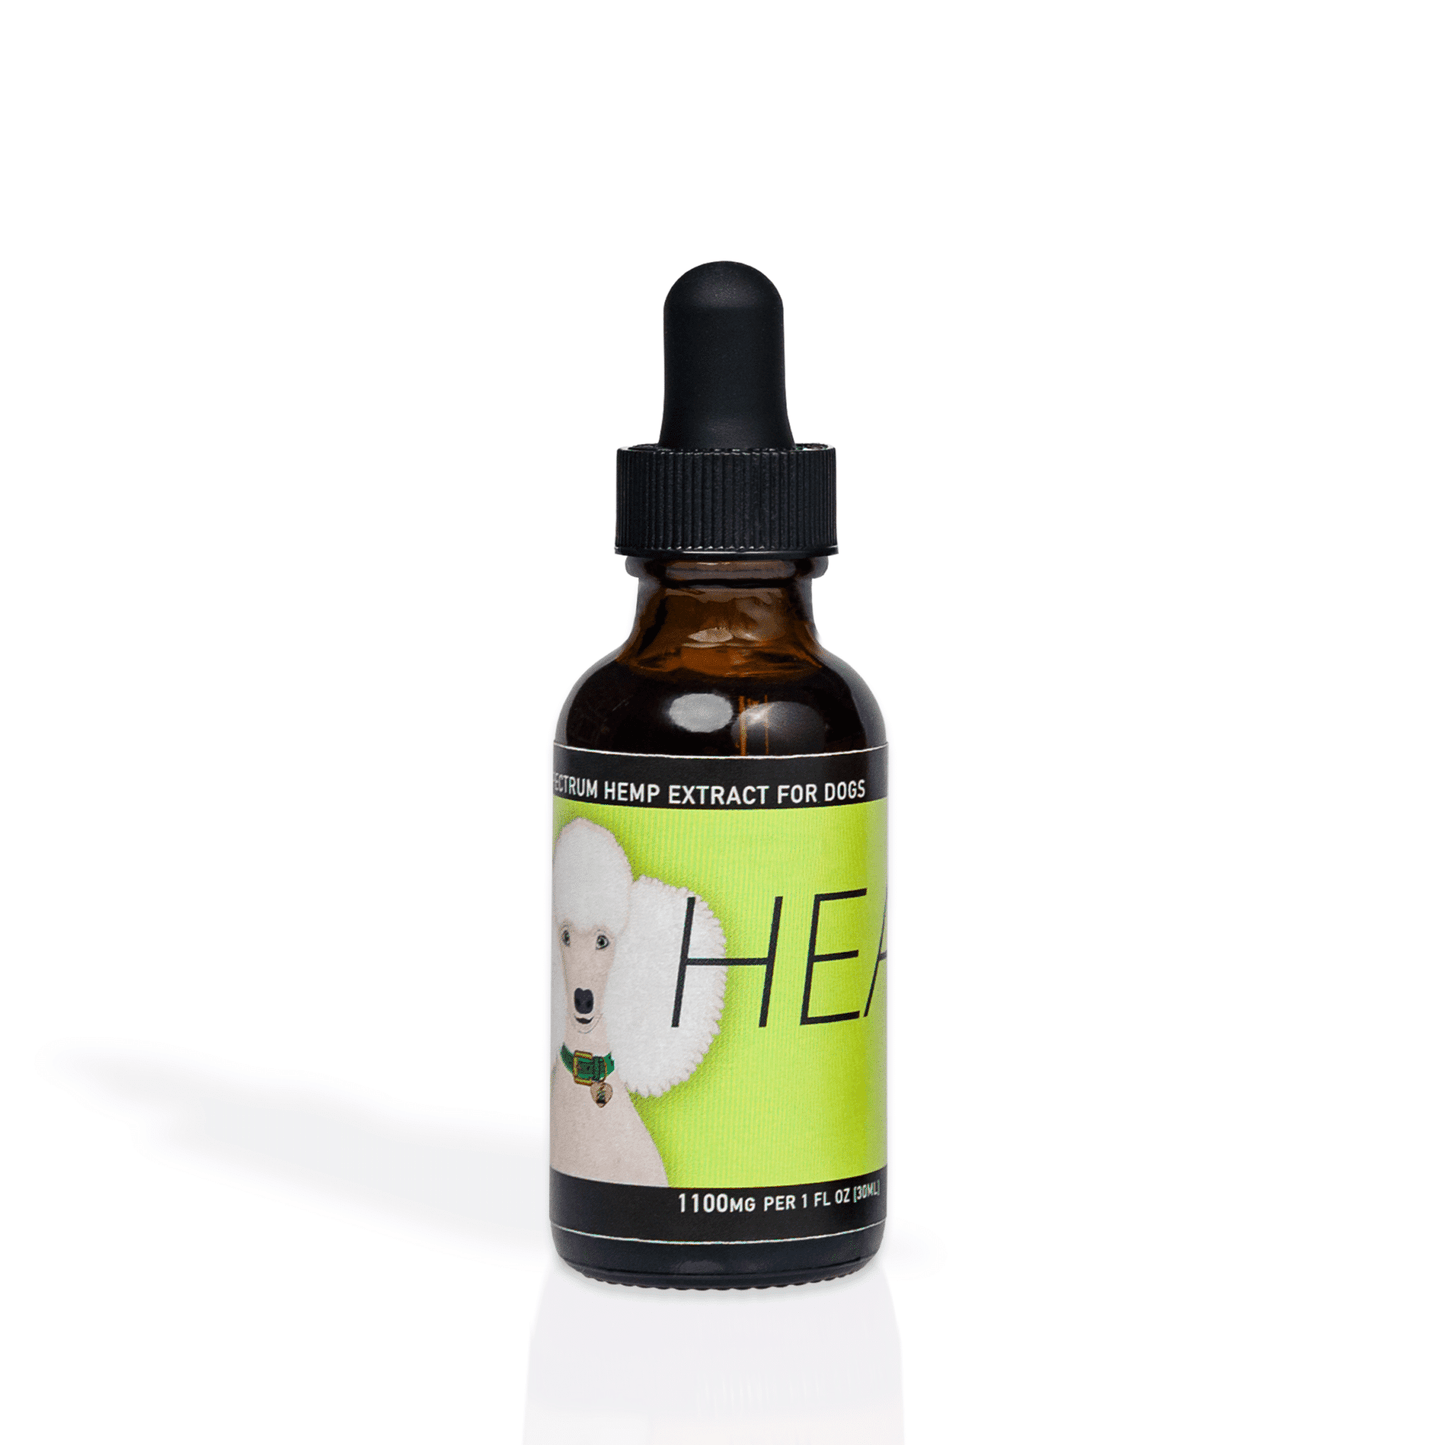 POWER DUO - Full Spectrum Oil For Dogs with Lumps, Cysts, Papillomas and more!